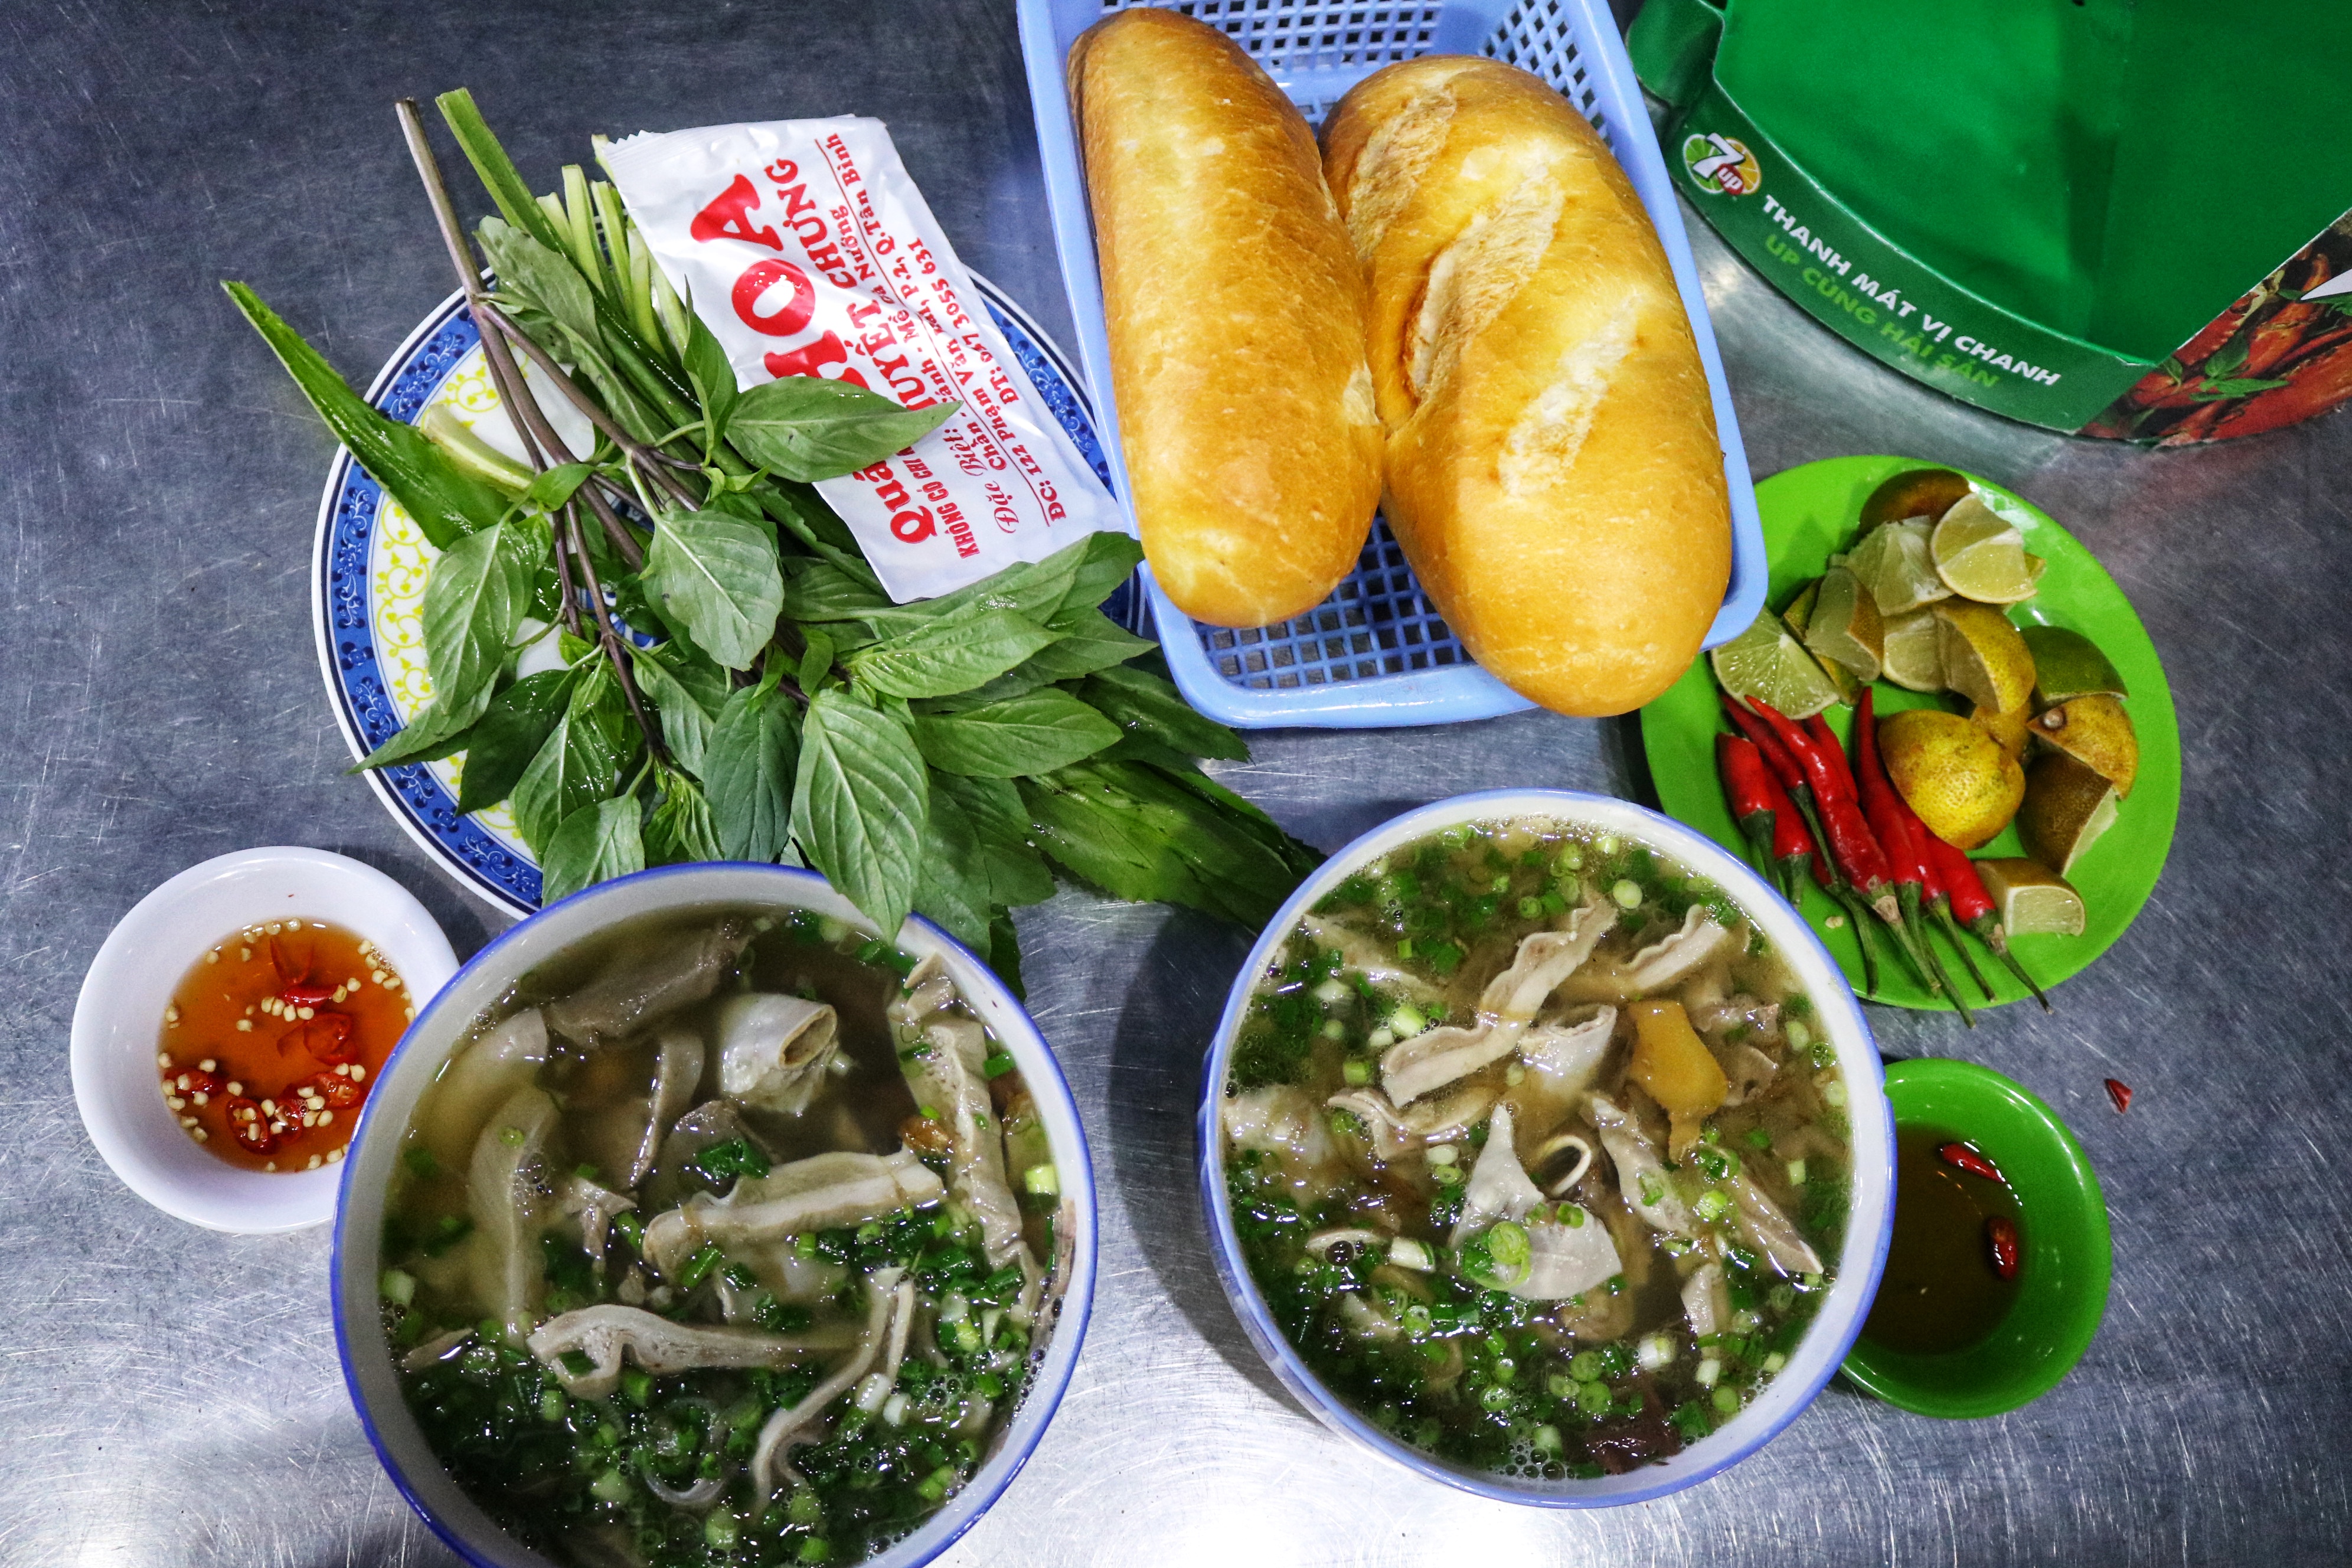 Two bowls of huyet chung, which consists of steamed pig blood pudding topped with organs, are served with bread and herbs at Pham Thi Hoa’s stall on Pham Van Hai Street in Tan Binh District, Ho Chi Minh City. Photo: Hoang An / Tuoi Tre News